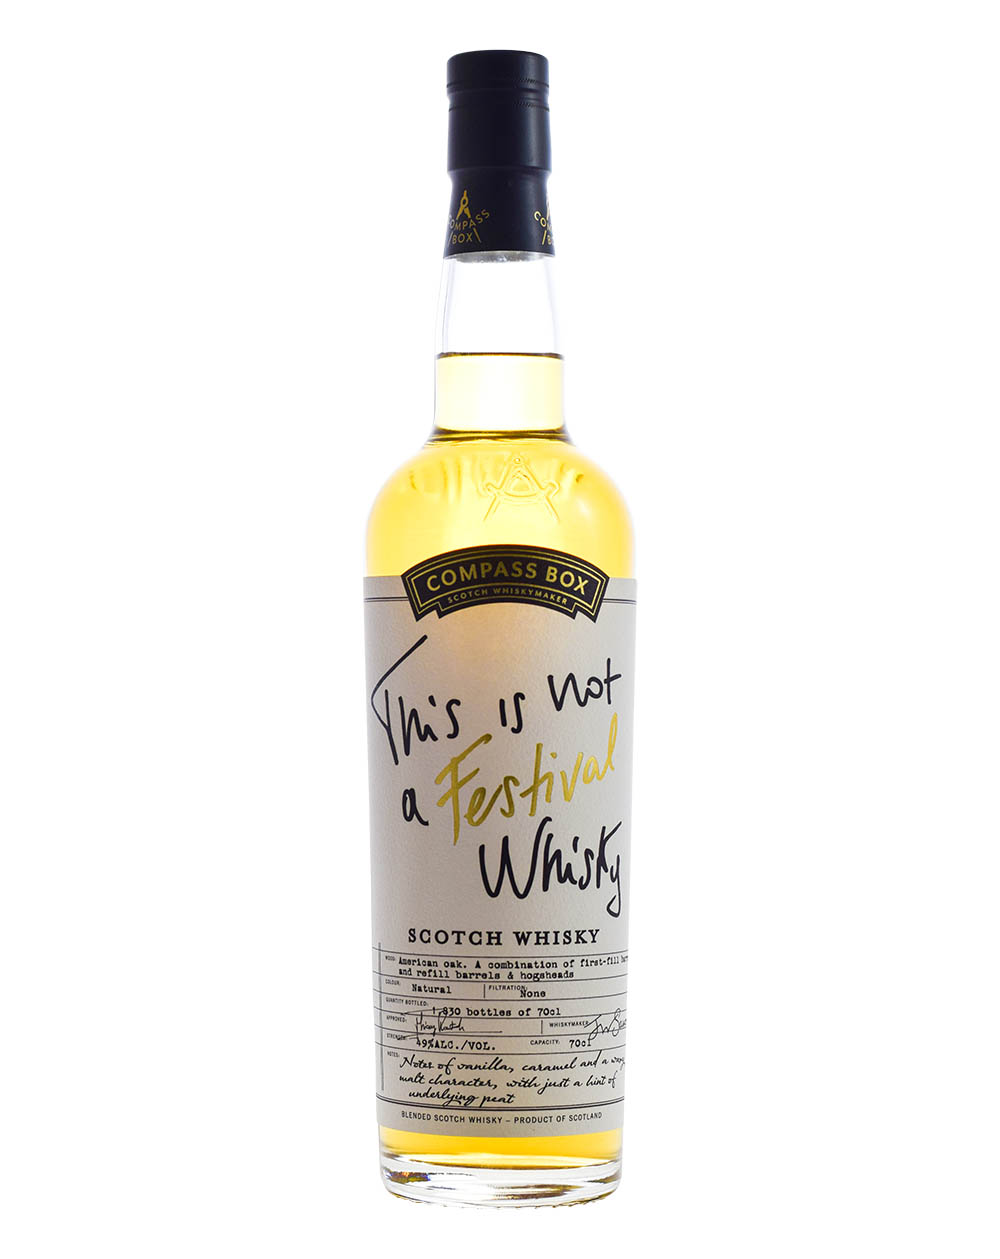 Compass Box This Is Not A Festival Whisky Musthave Malts MHM